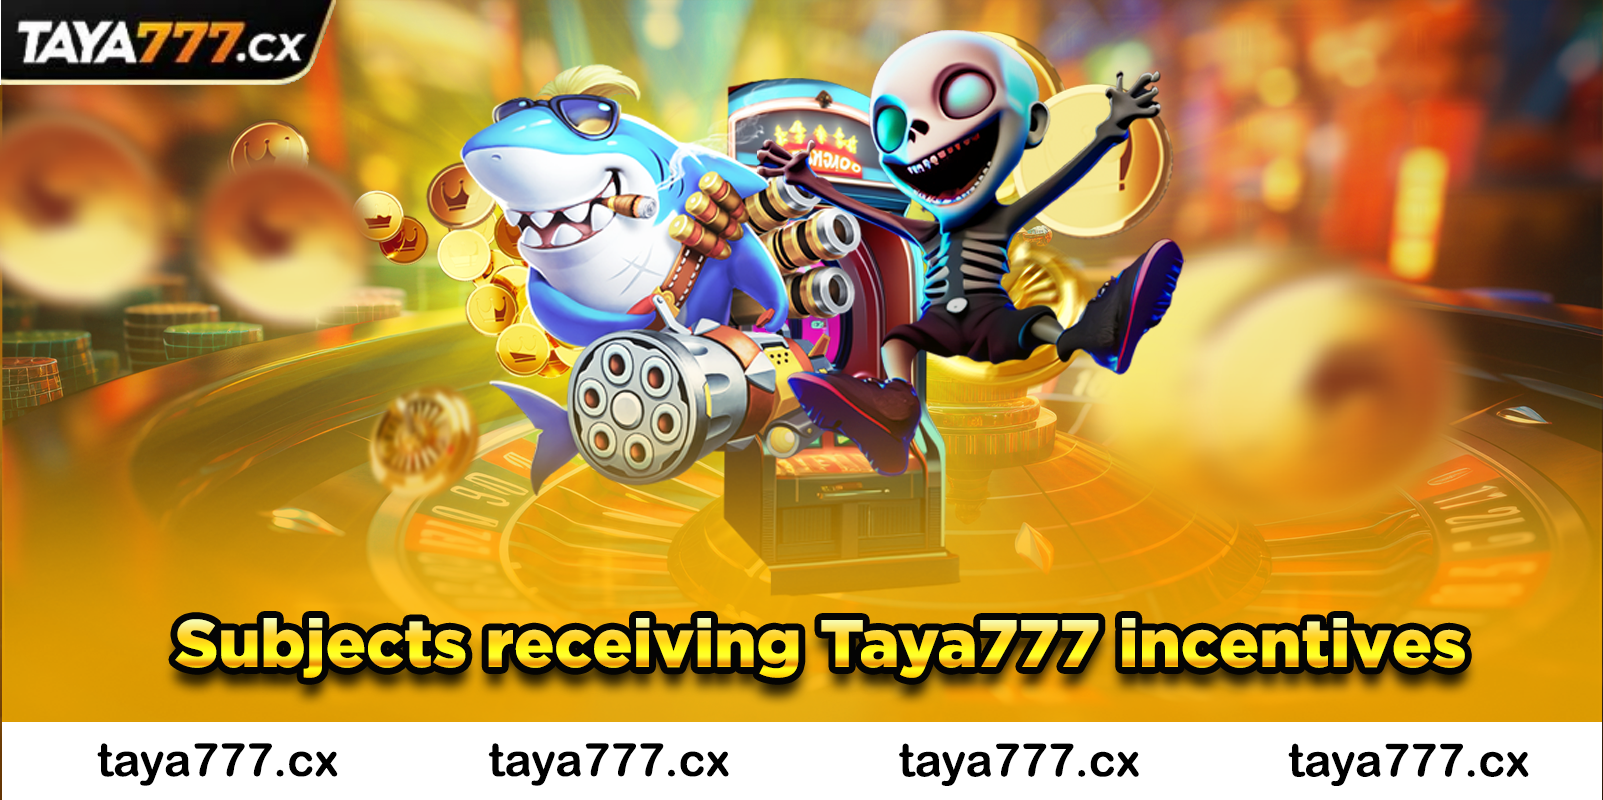 Subjects receiving Taya777 incentives